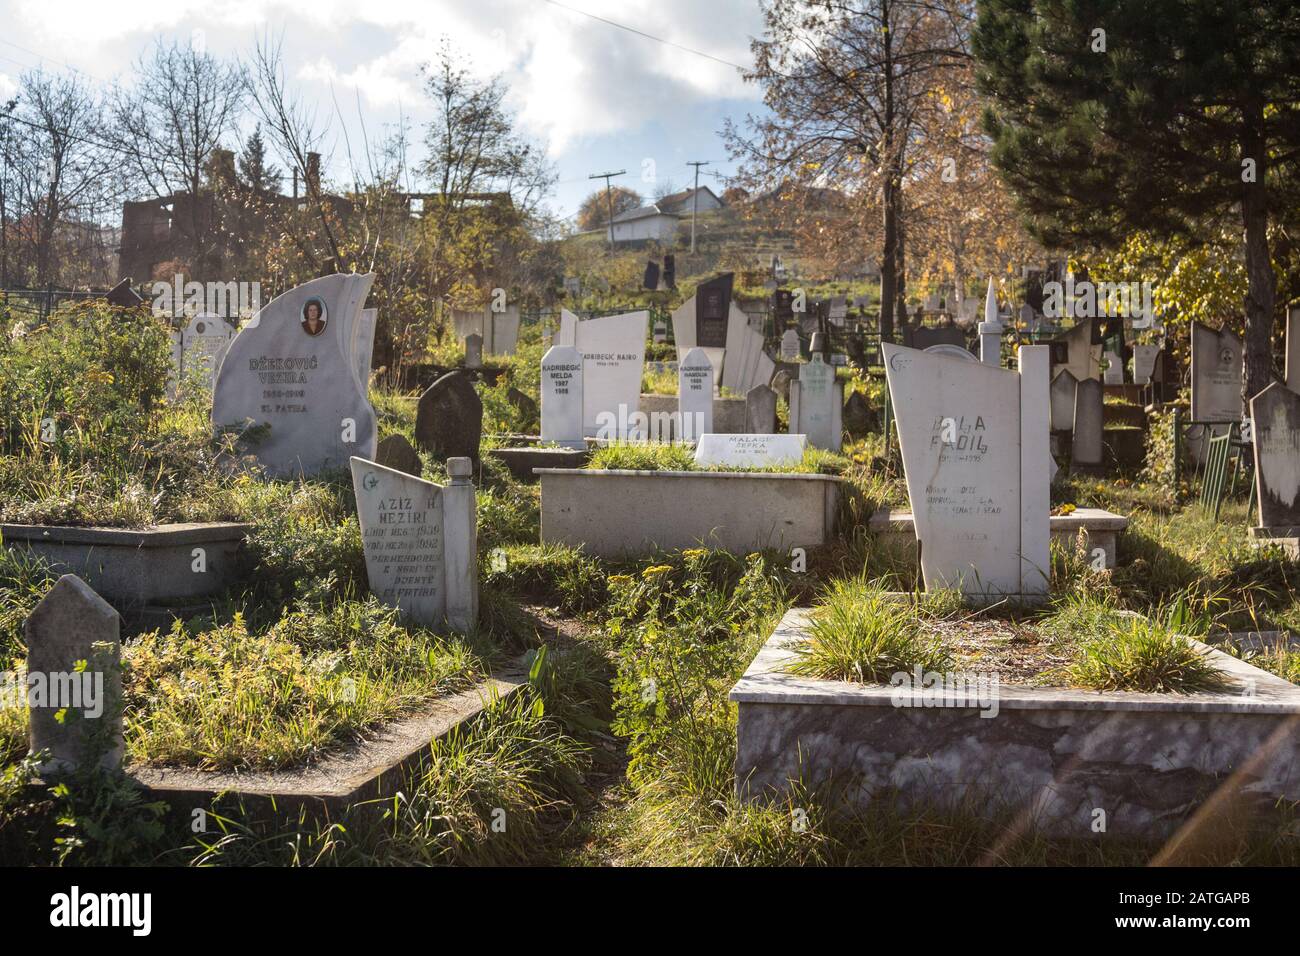 MITROVICA, KOSOVO - NOVEMBER 11, 2016: Graves in the bosniak muslim cemetery of North Mitrovica in Kosovo. It is one of the main graveyards of that et Stock Photo